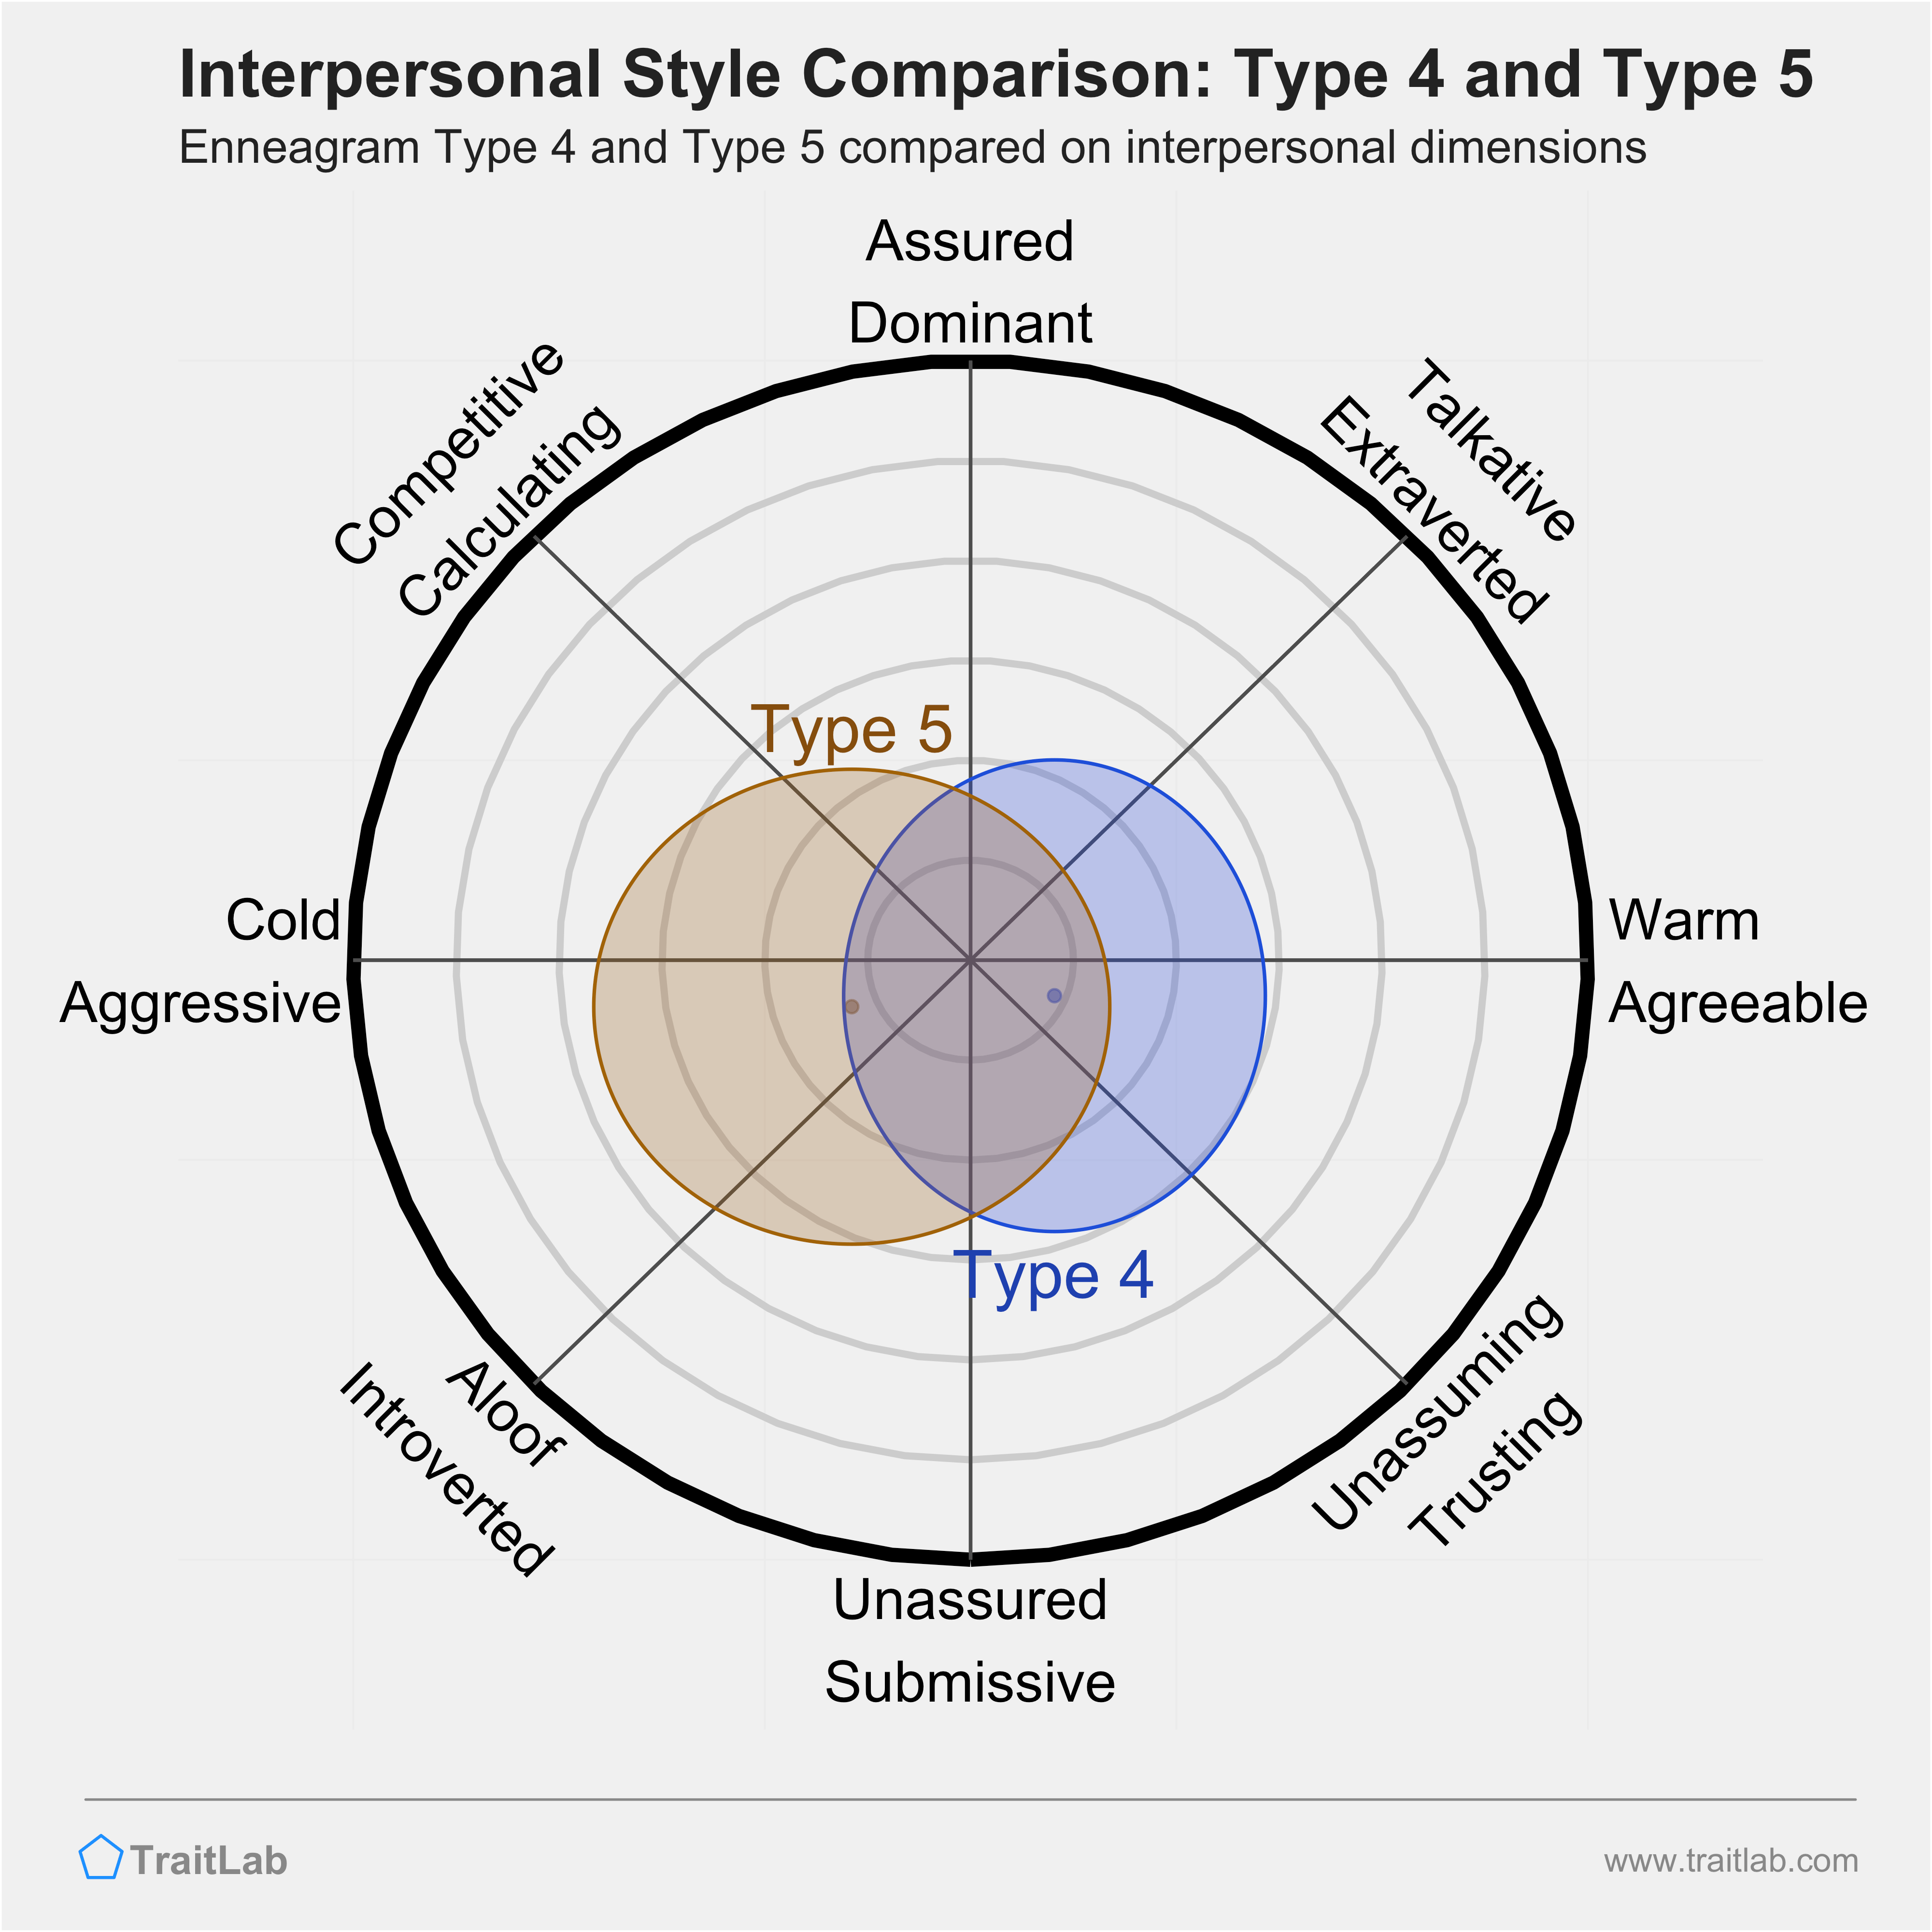 Enneagram Type 4 and Type 5 comparison across interpersonal dimensions